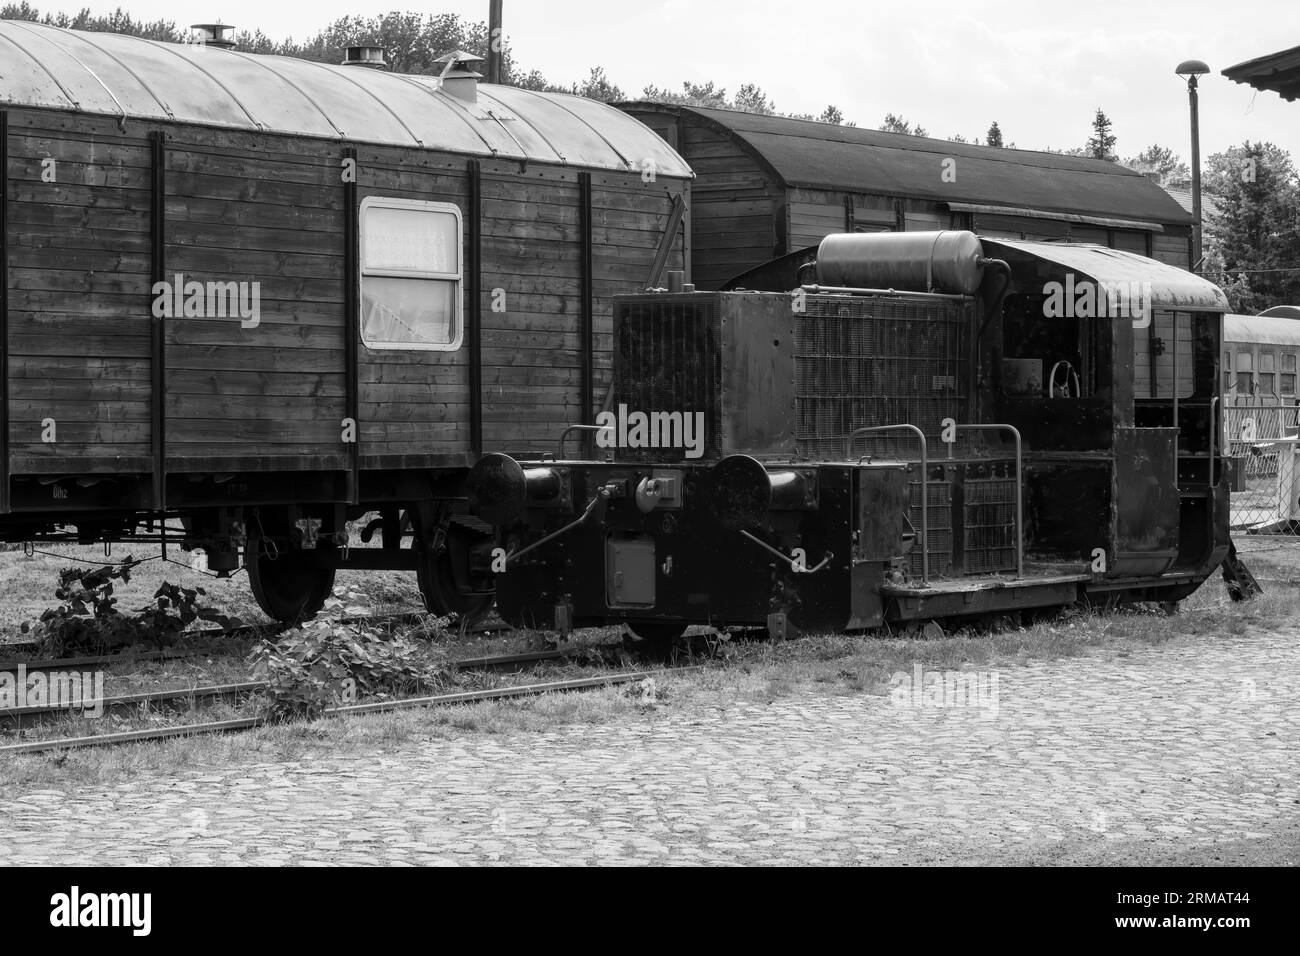 German railroad vehicles from times of the 20th century Stock Photo